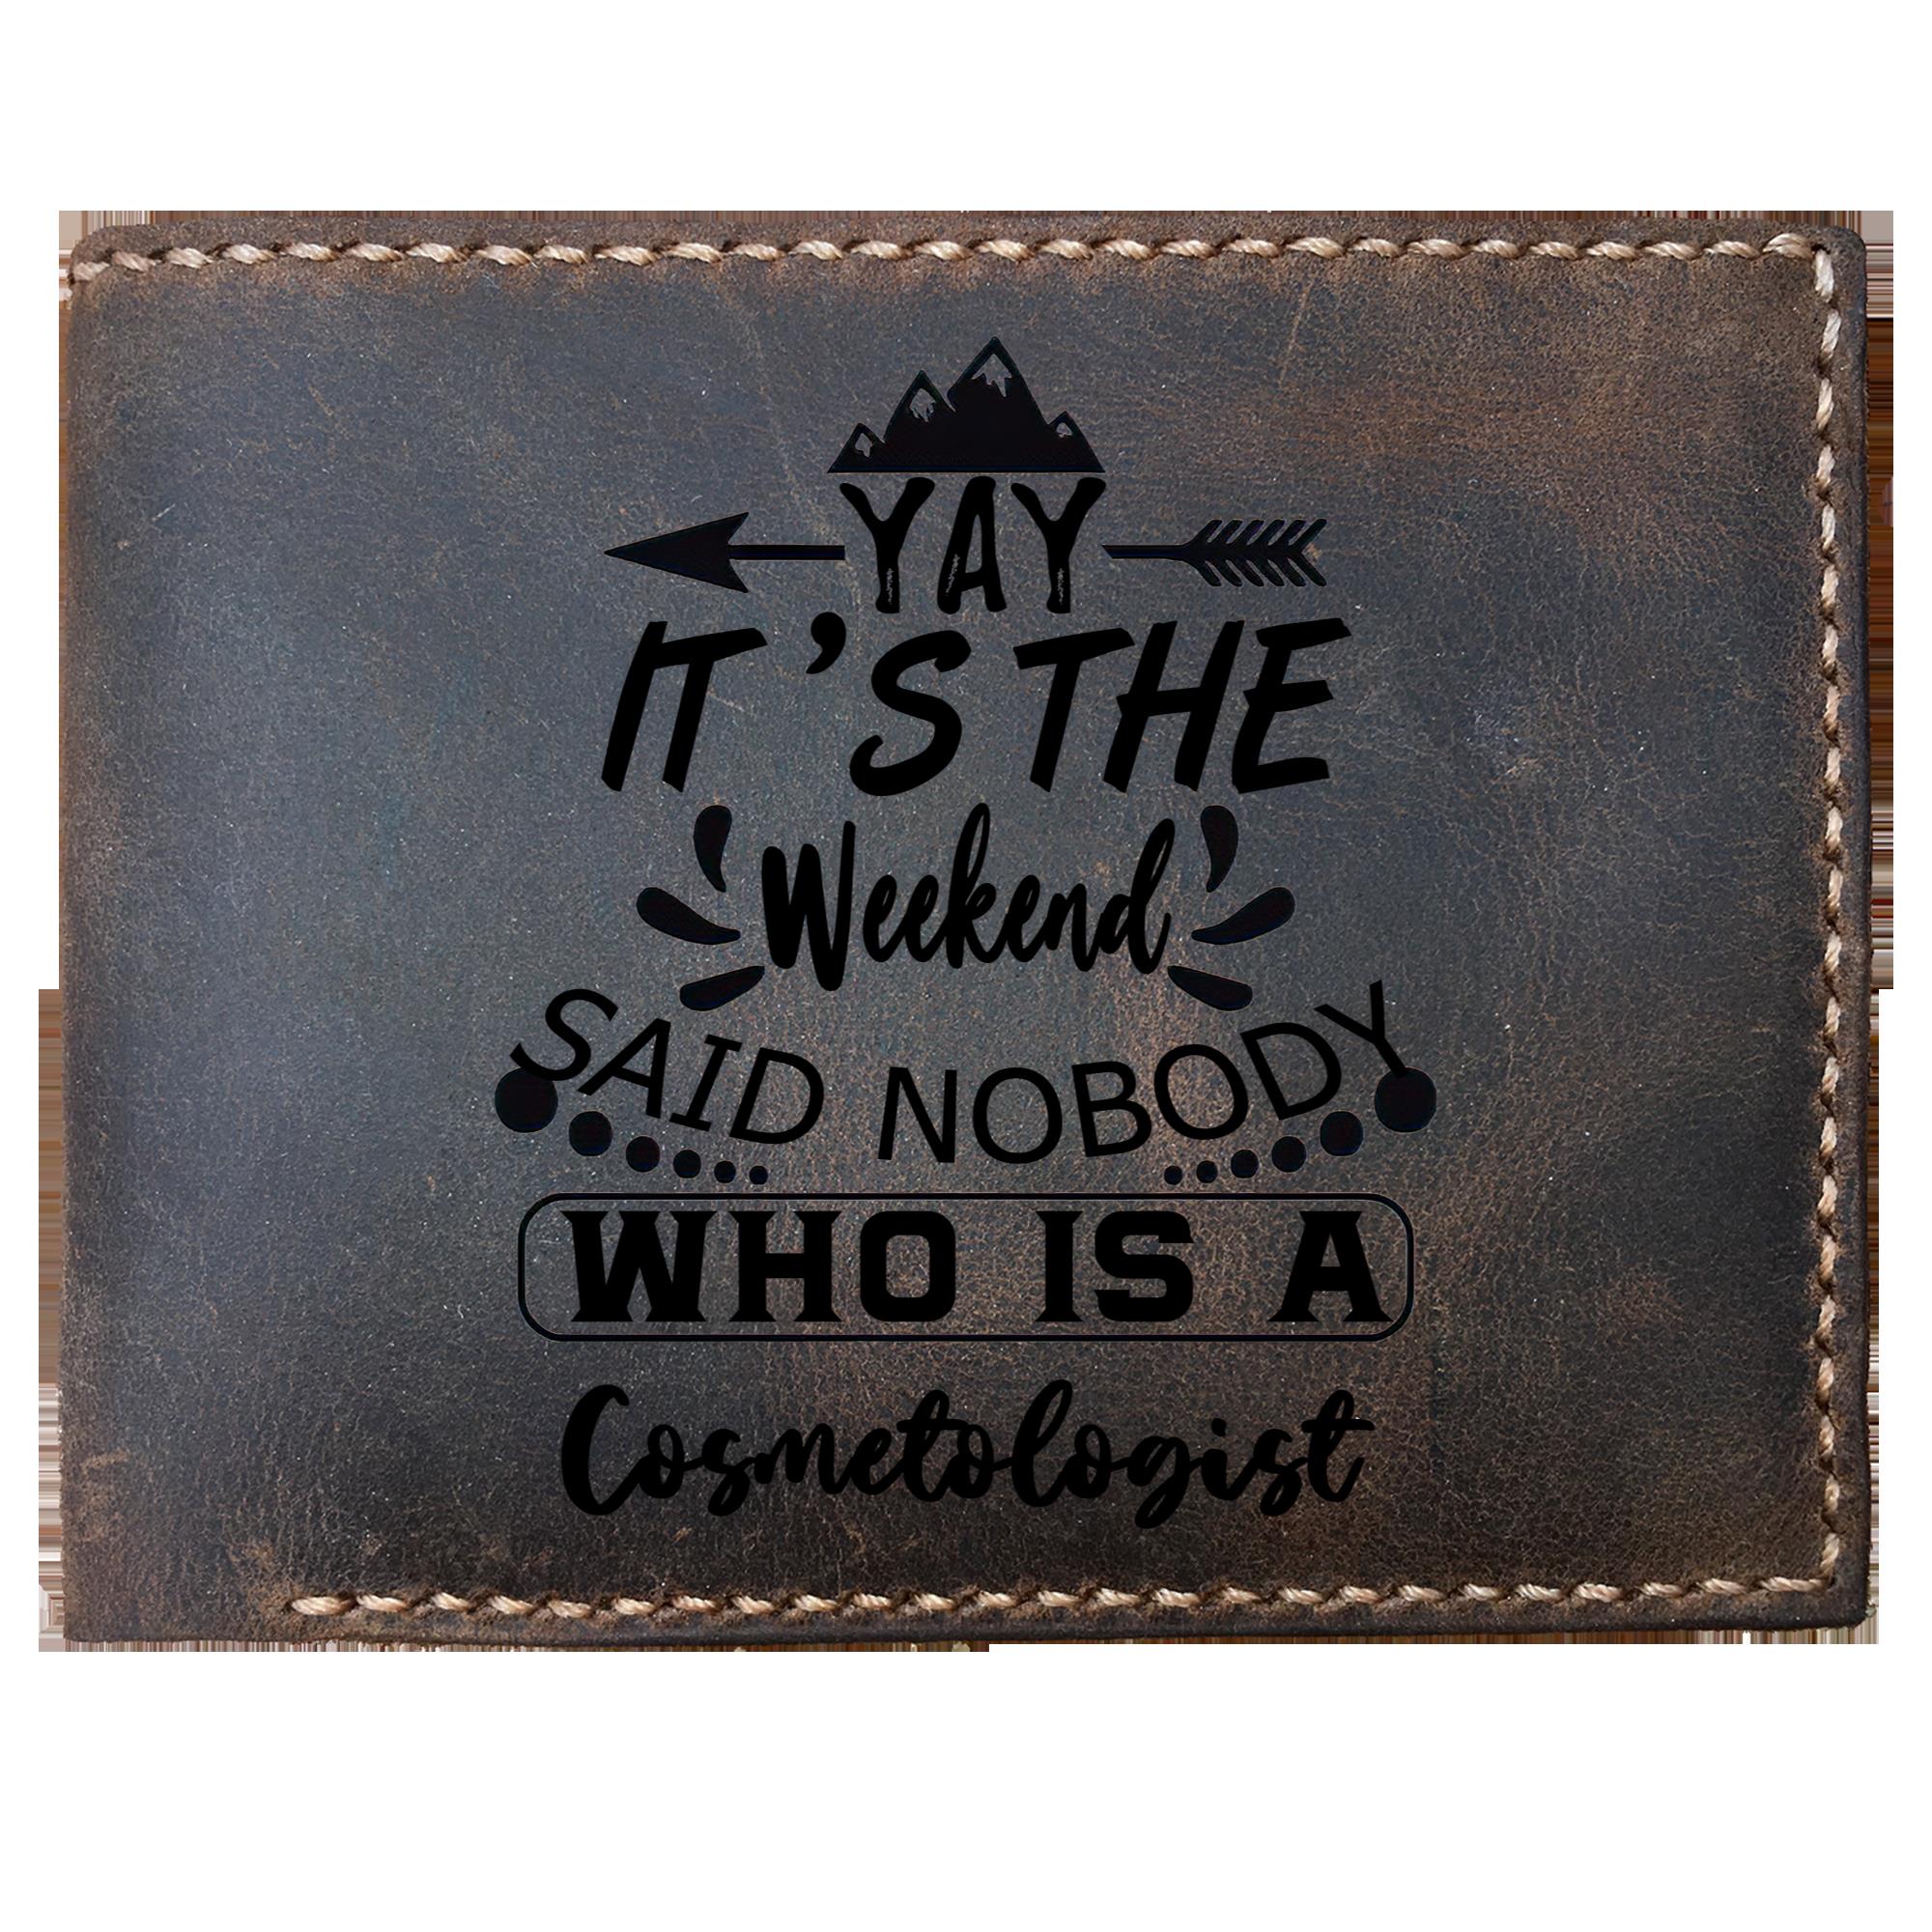 Skitongifts Funny Custom Laser Engraved Bifold Leather Wallet For Men, It's The Weekend Said Nobody Who Is A Cosmetologist, Father's Day Gifts